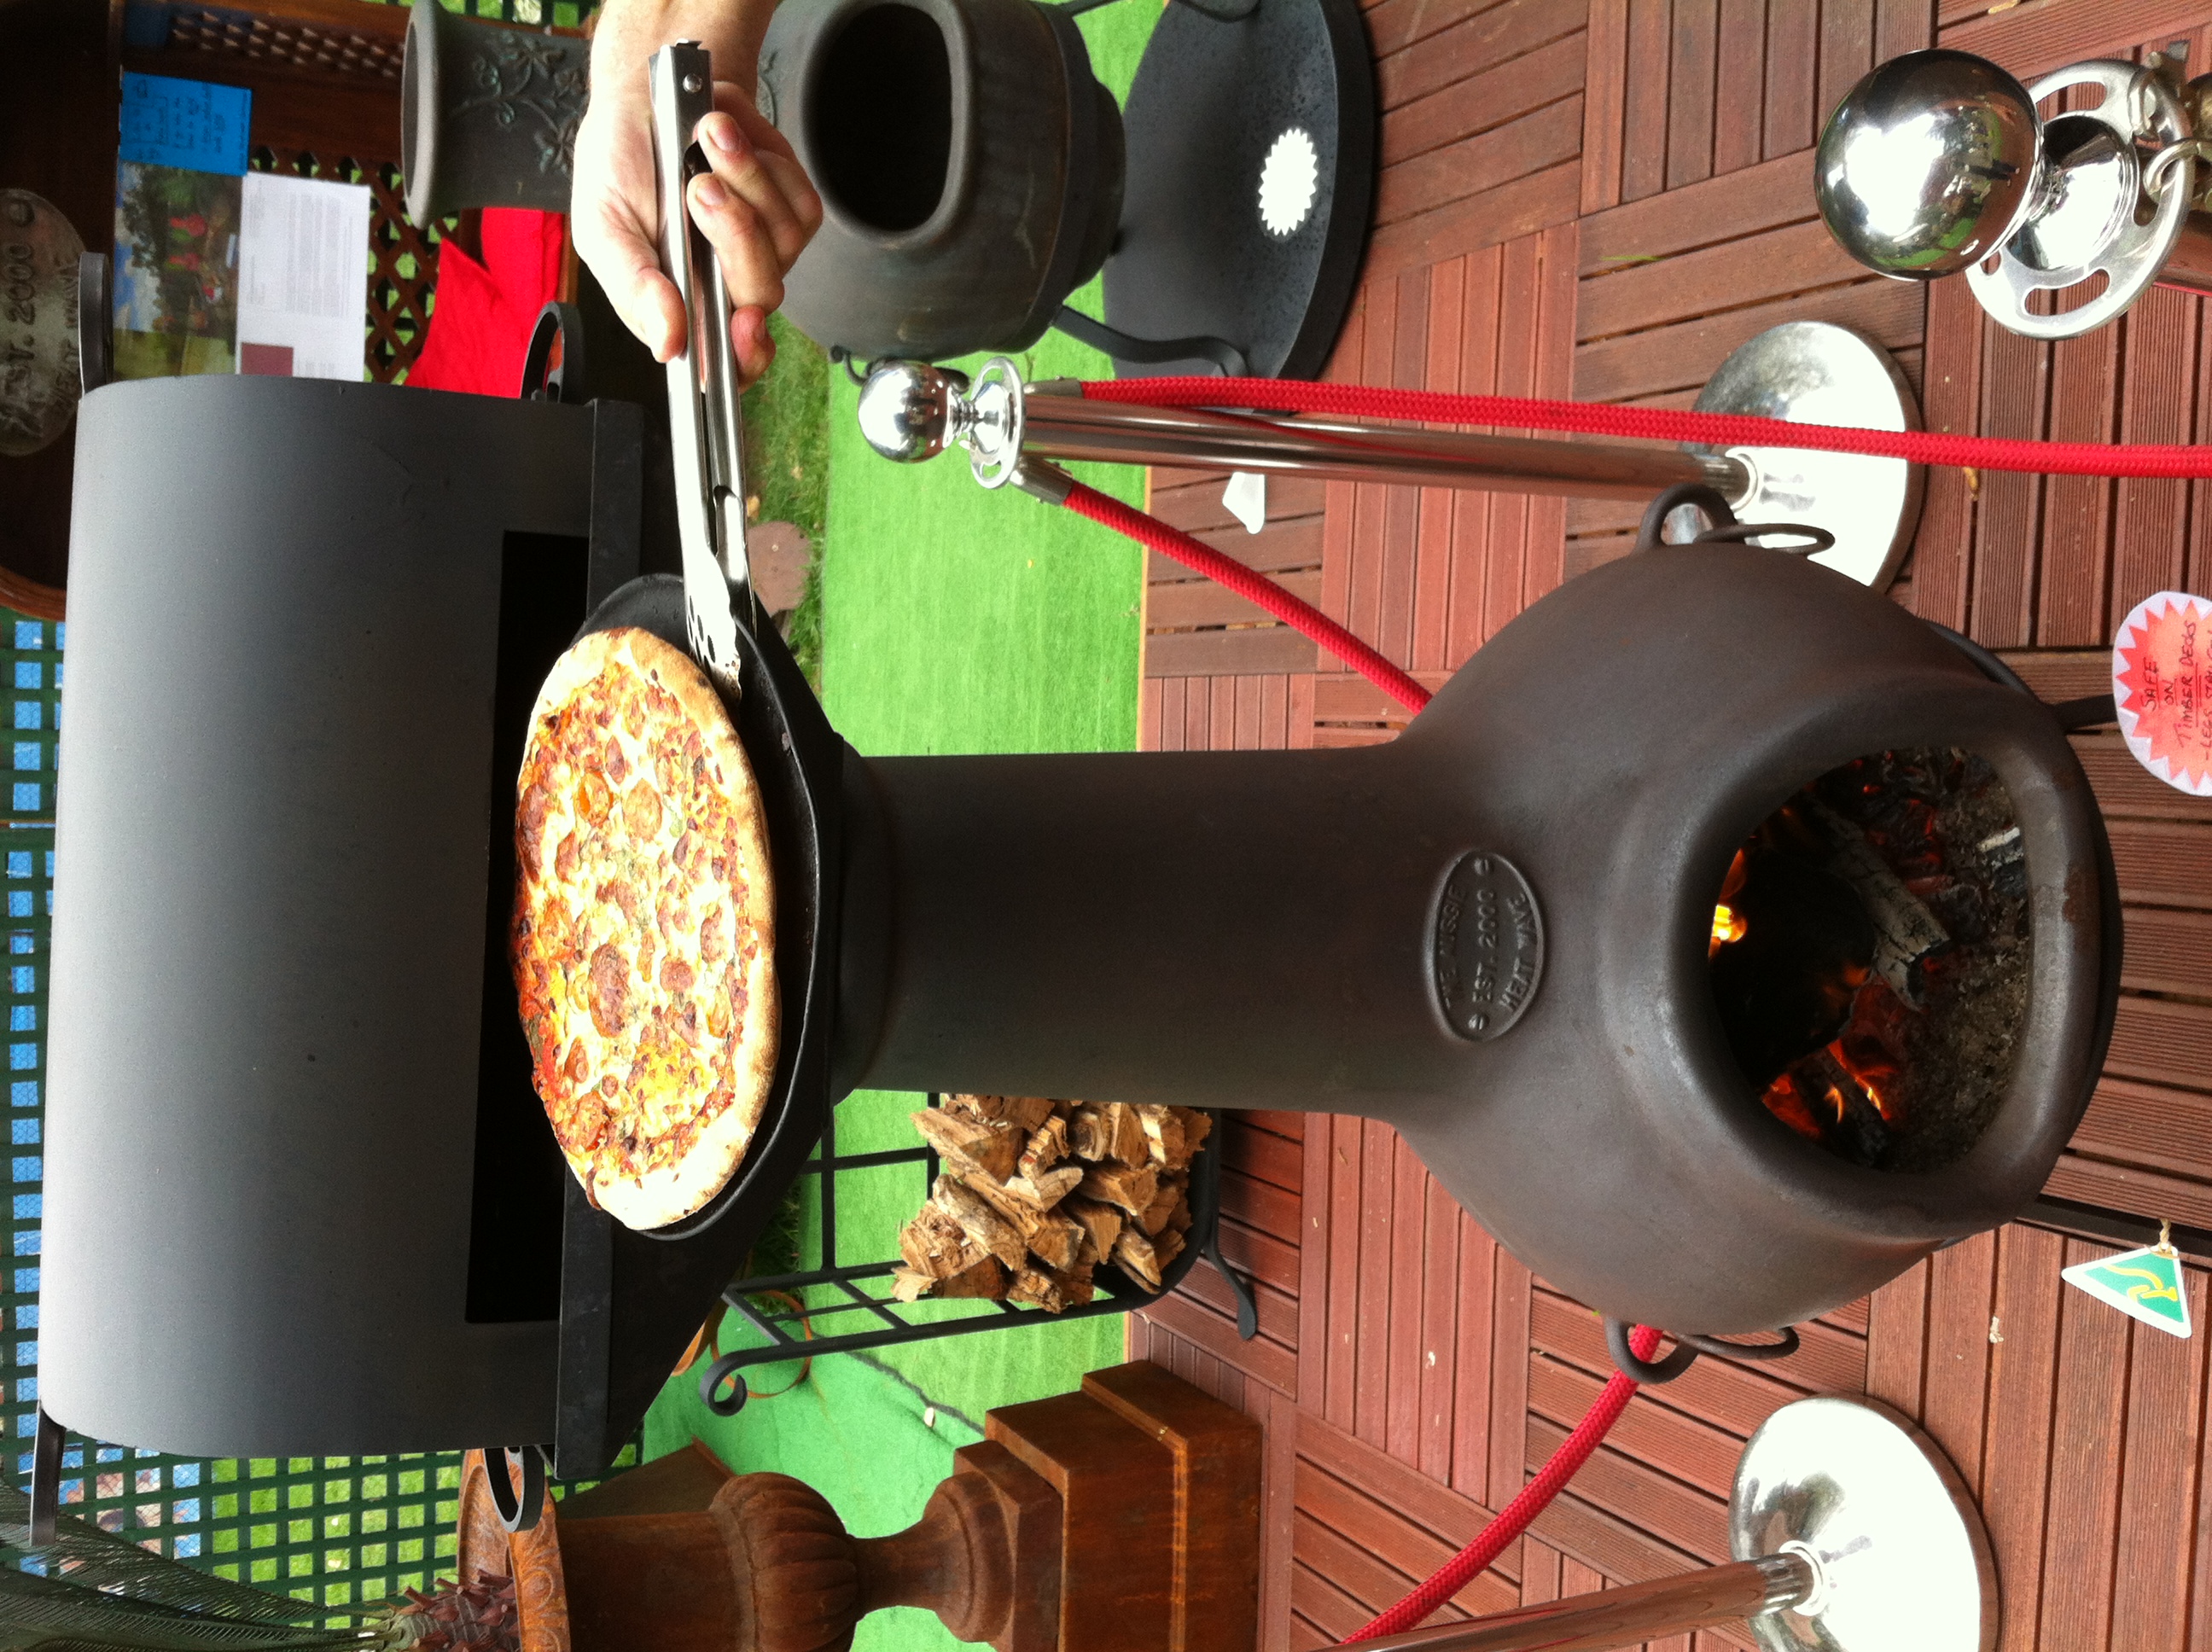 Cooking a pizza on a chiminea